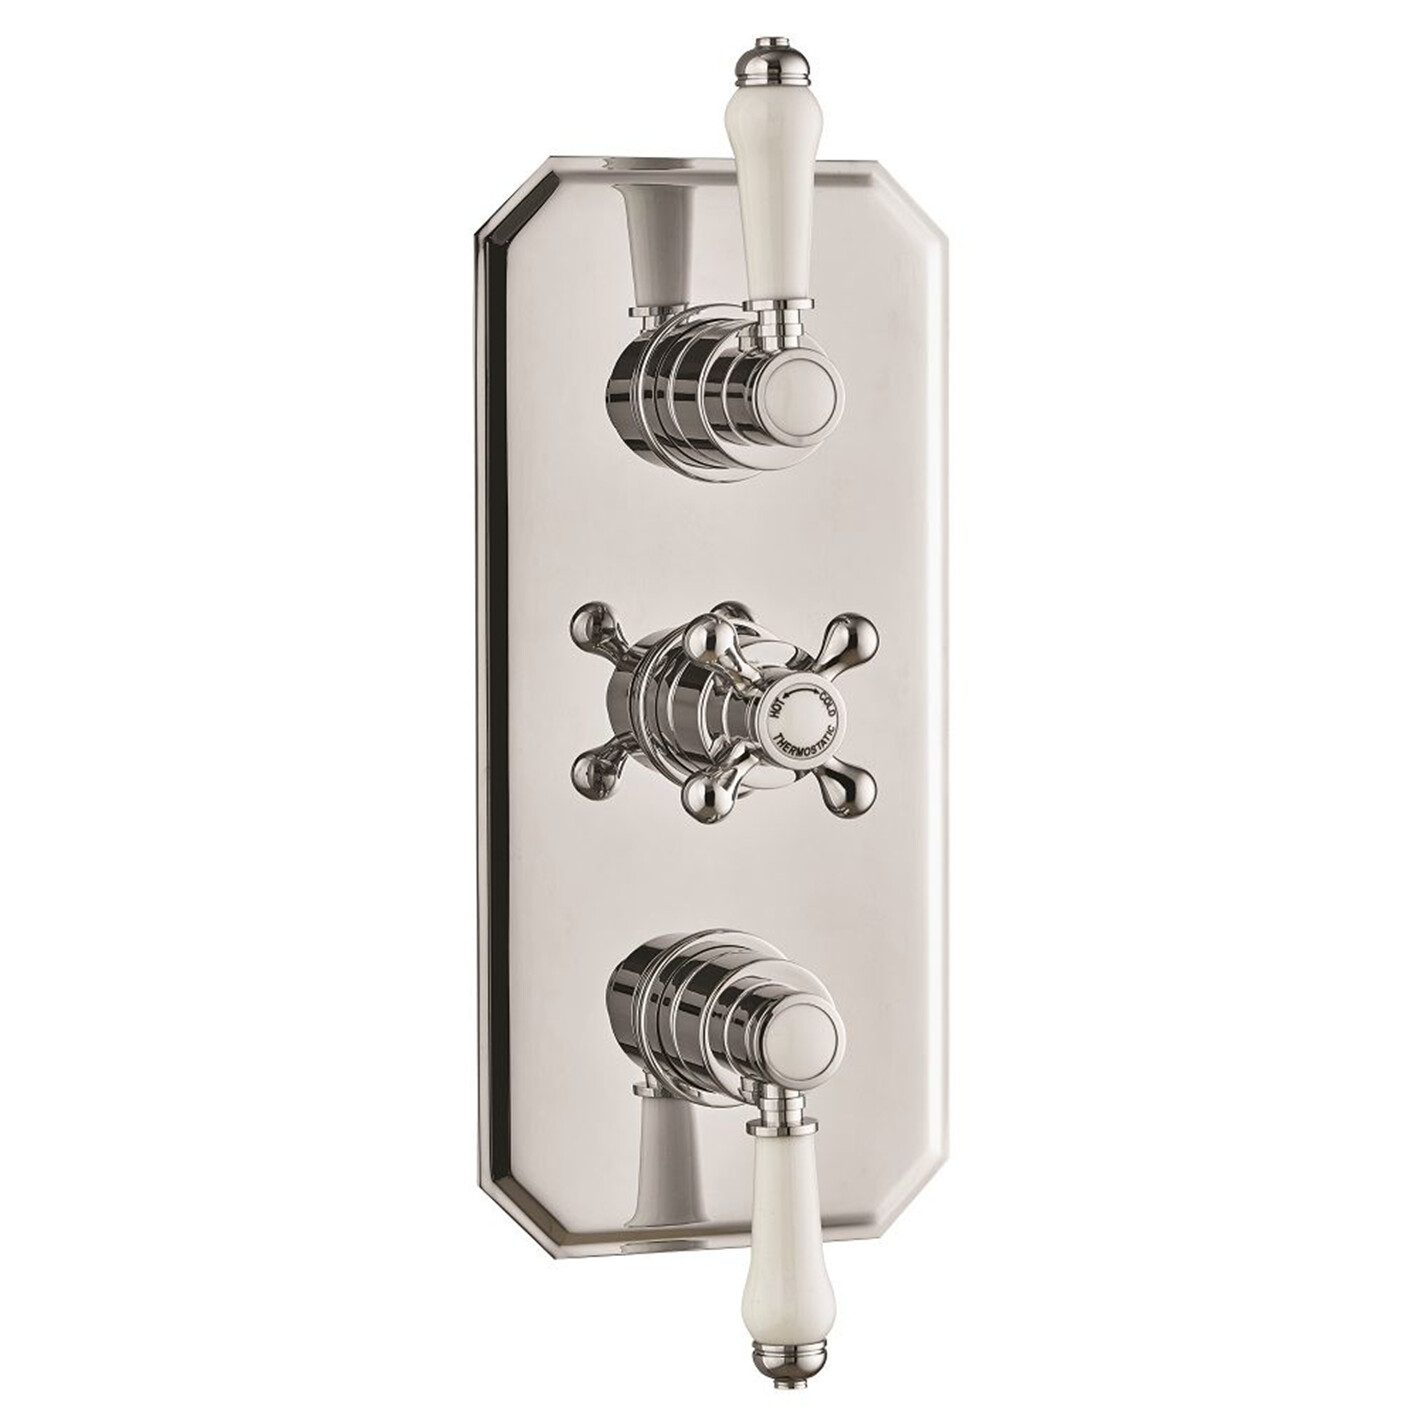 SONAS Carys Concealed Triple Control Shower Valve